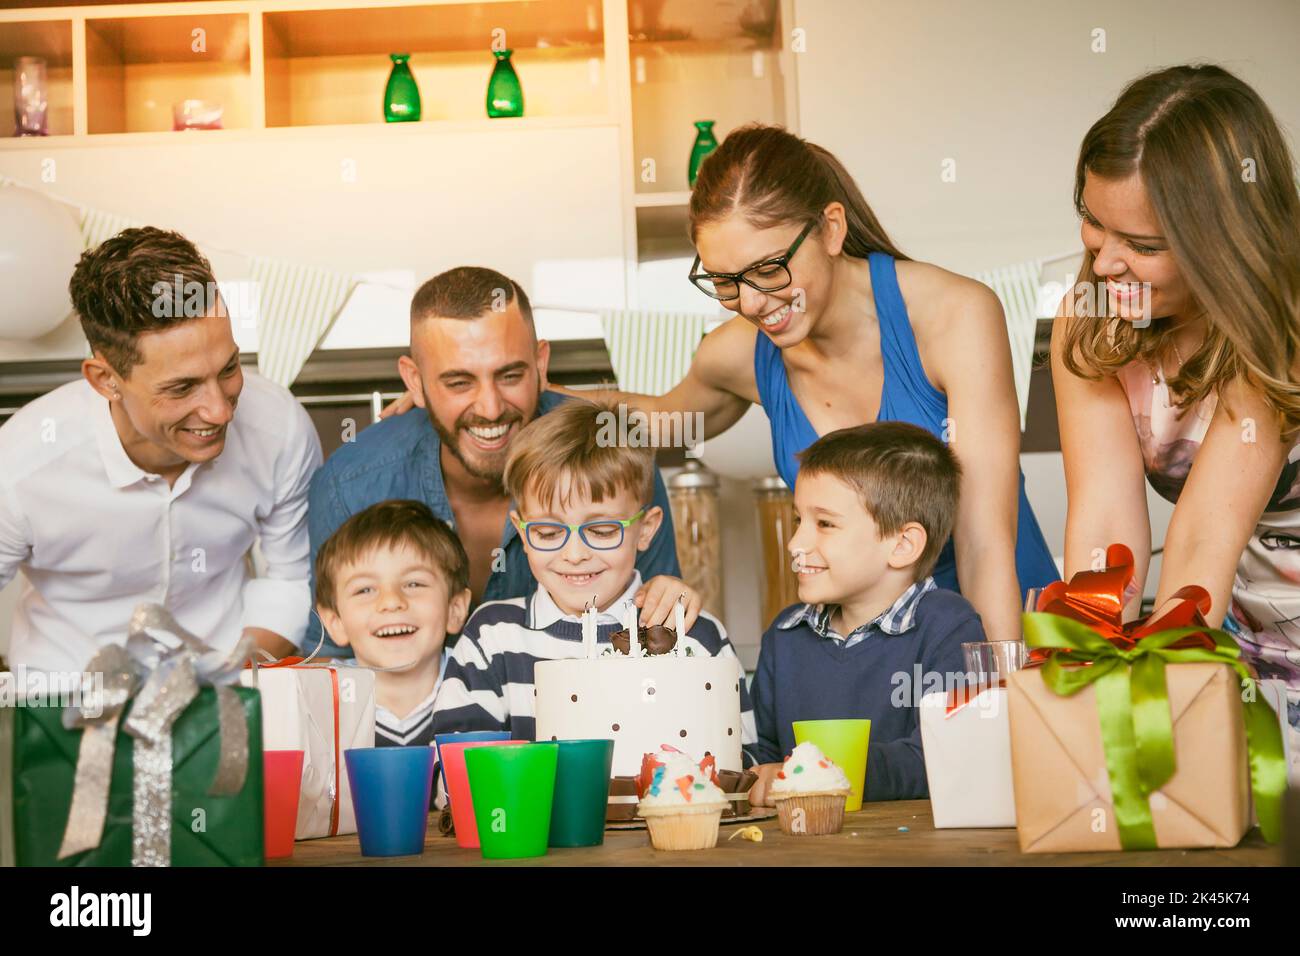 happy families with children celebrating around a cake for a birthday Stock Photo